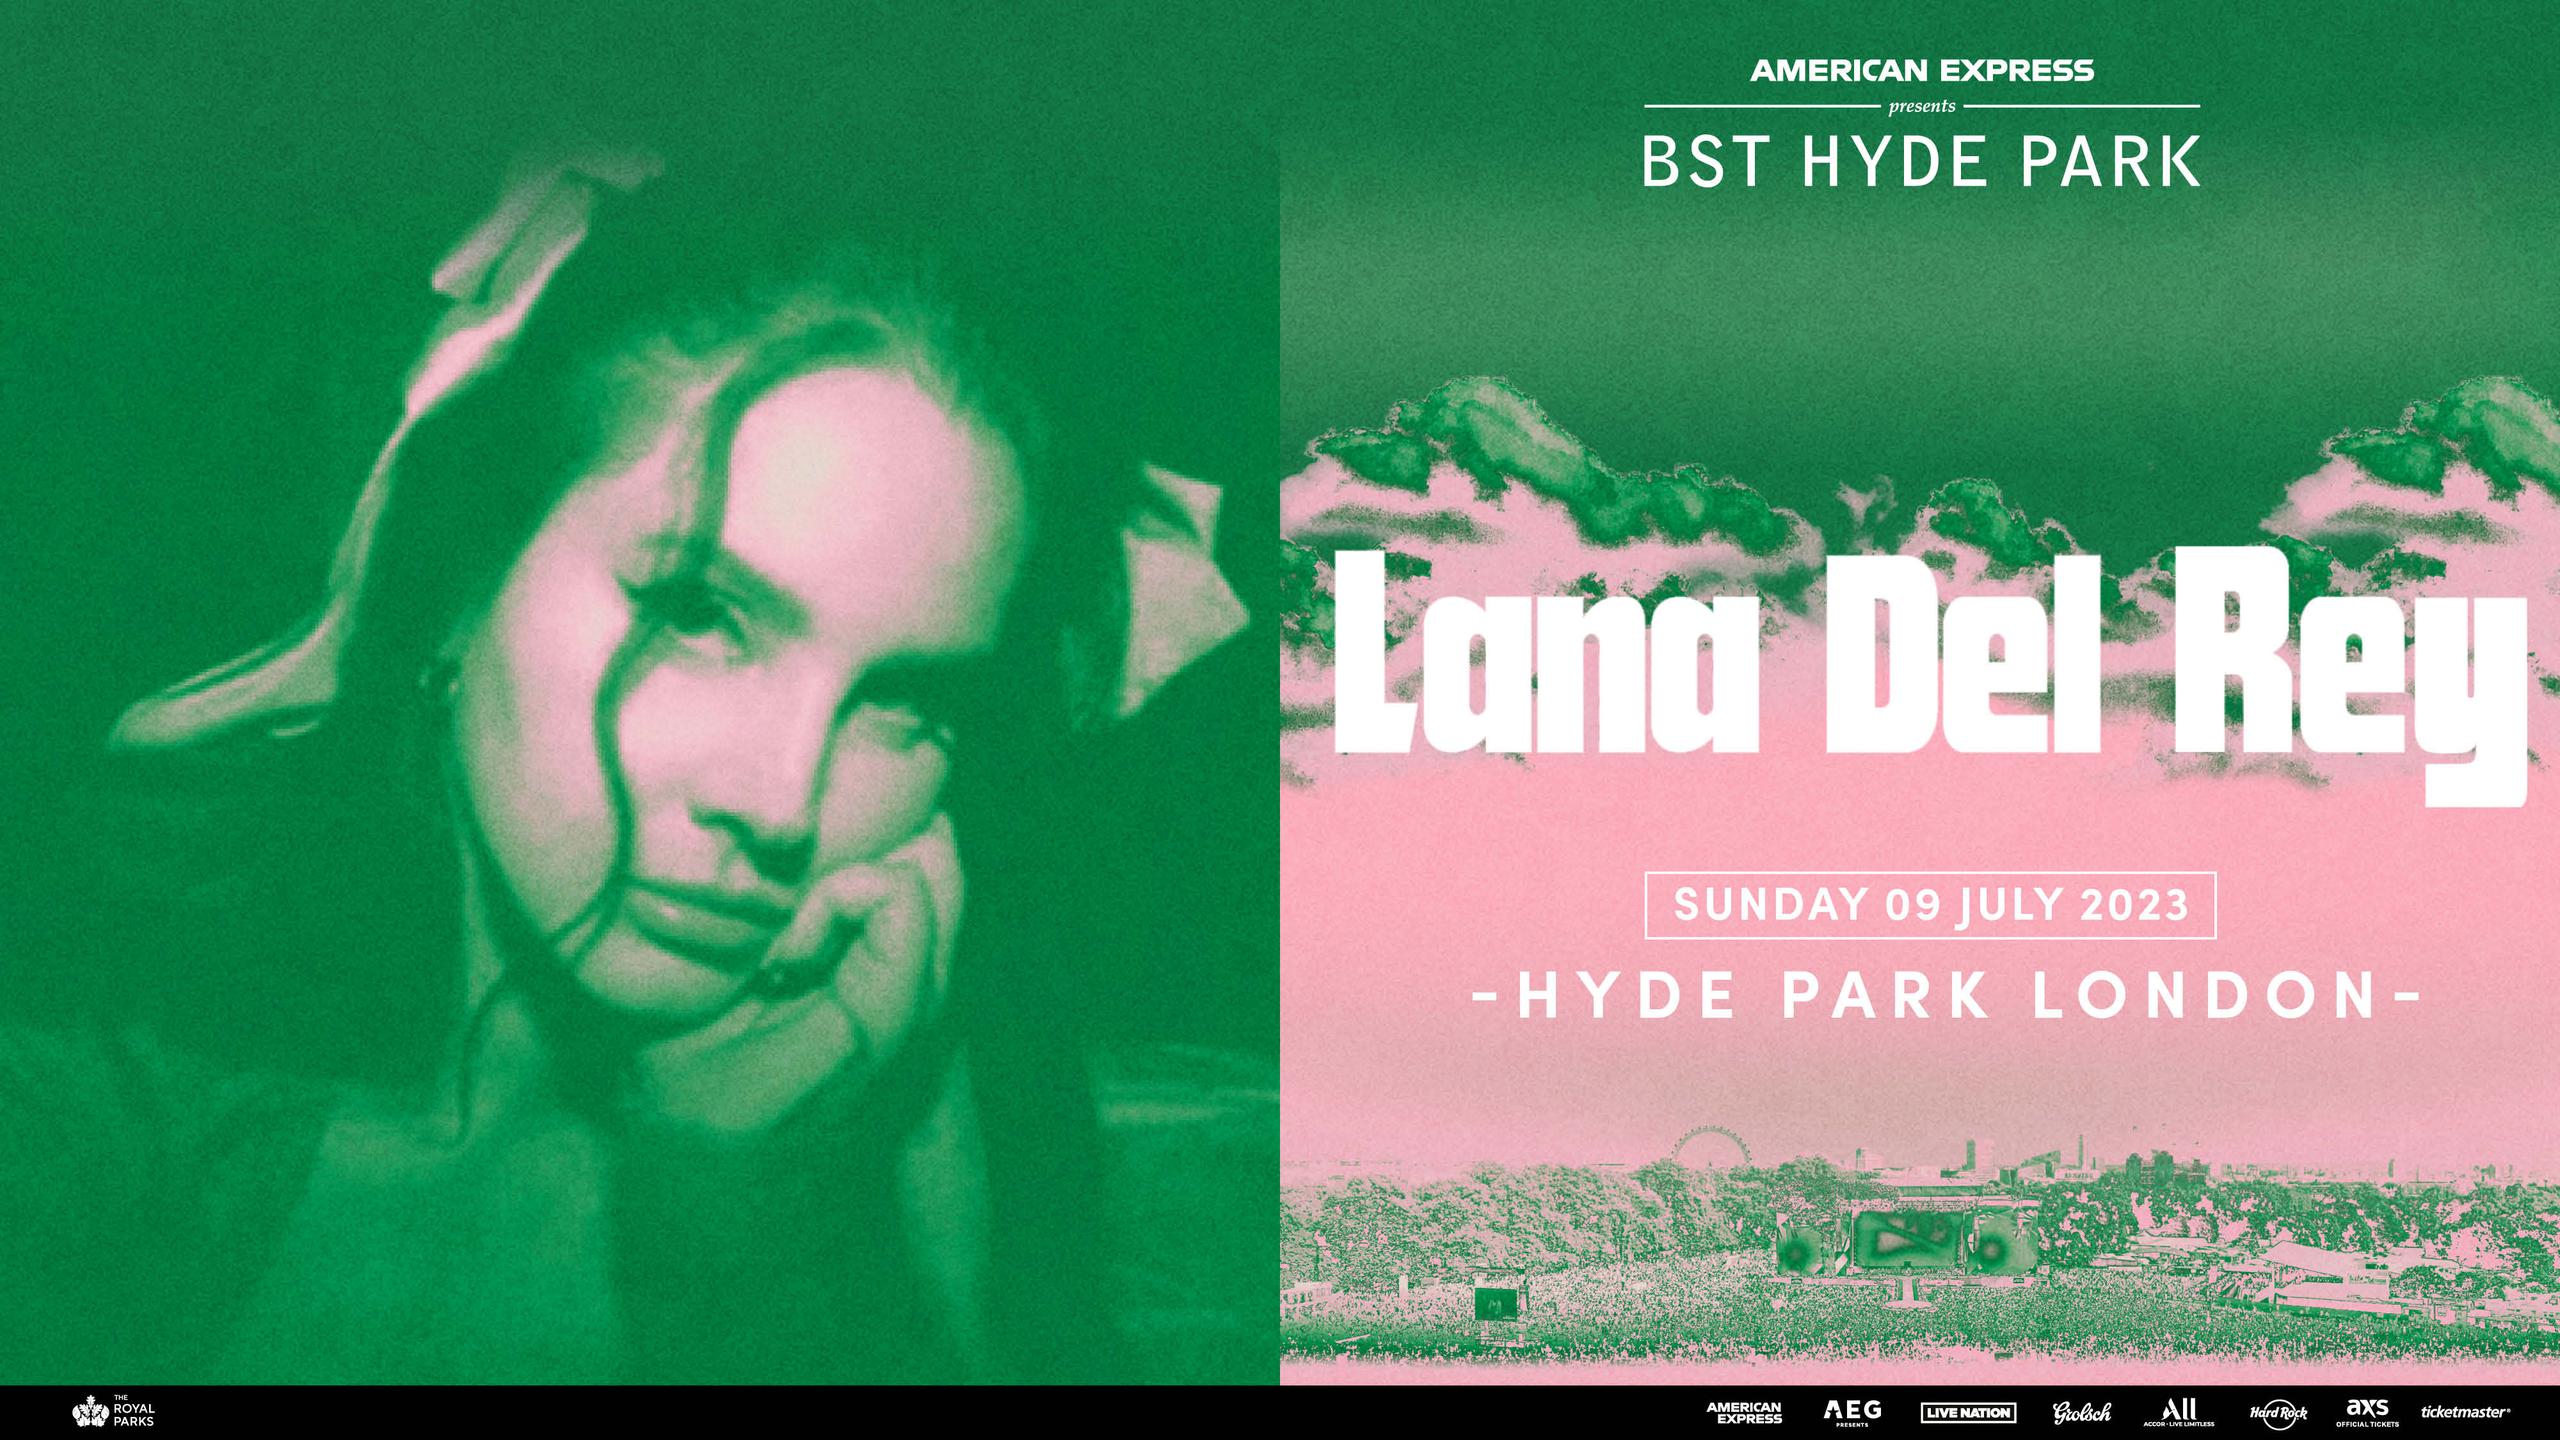 Lana del Rey concert tickets for Hyde Park, London Sunday, 9 July 2023